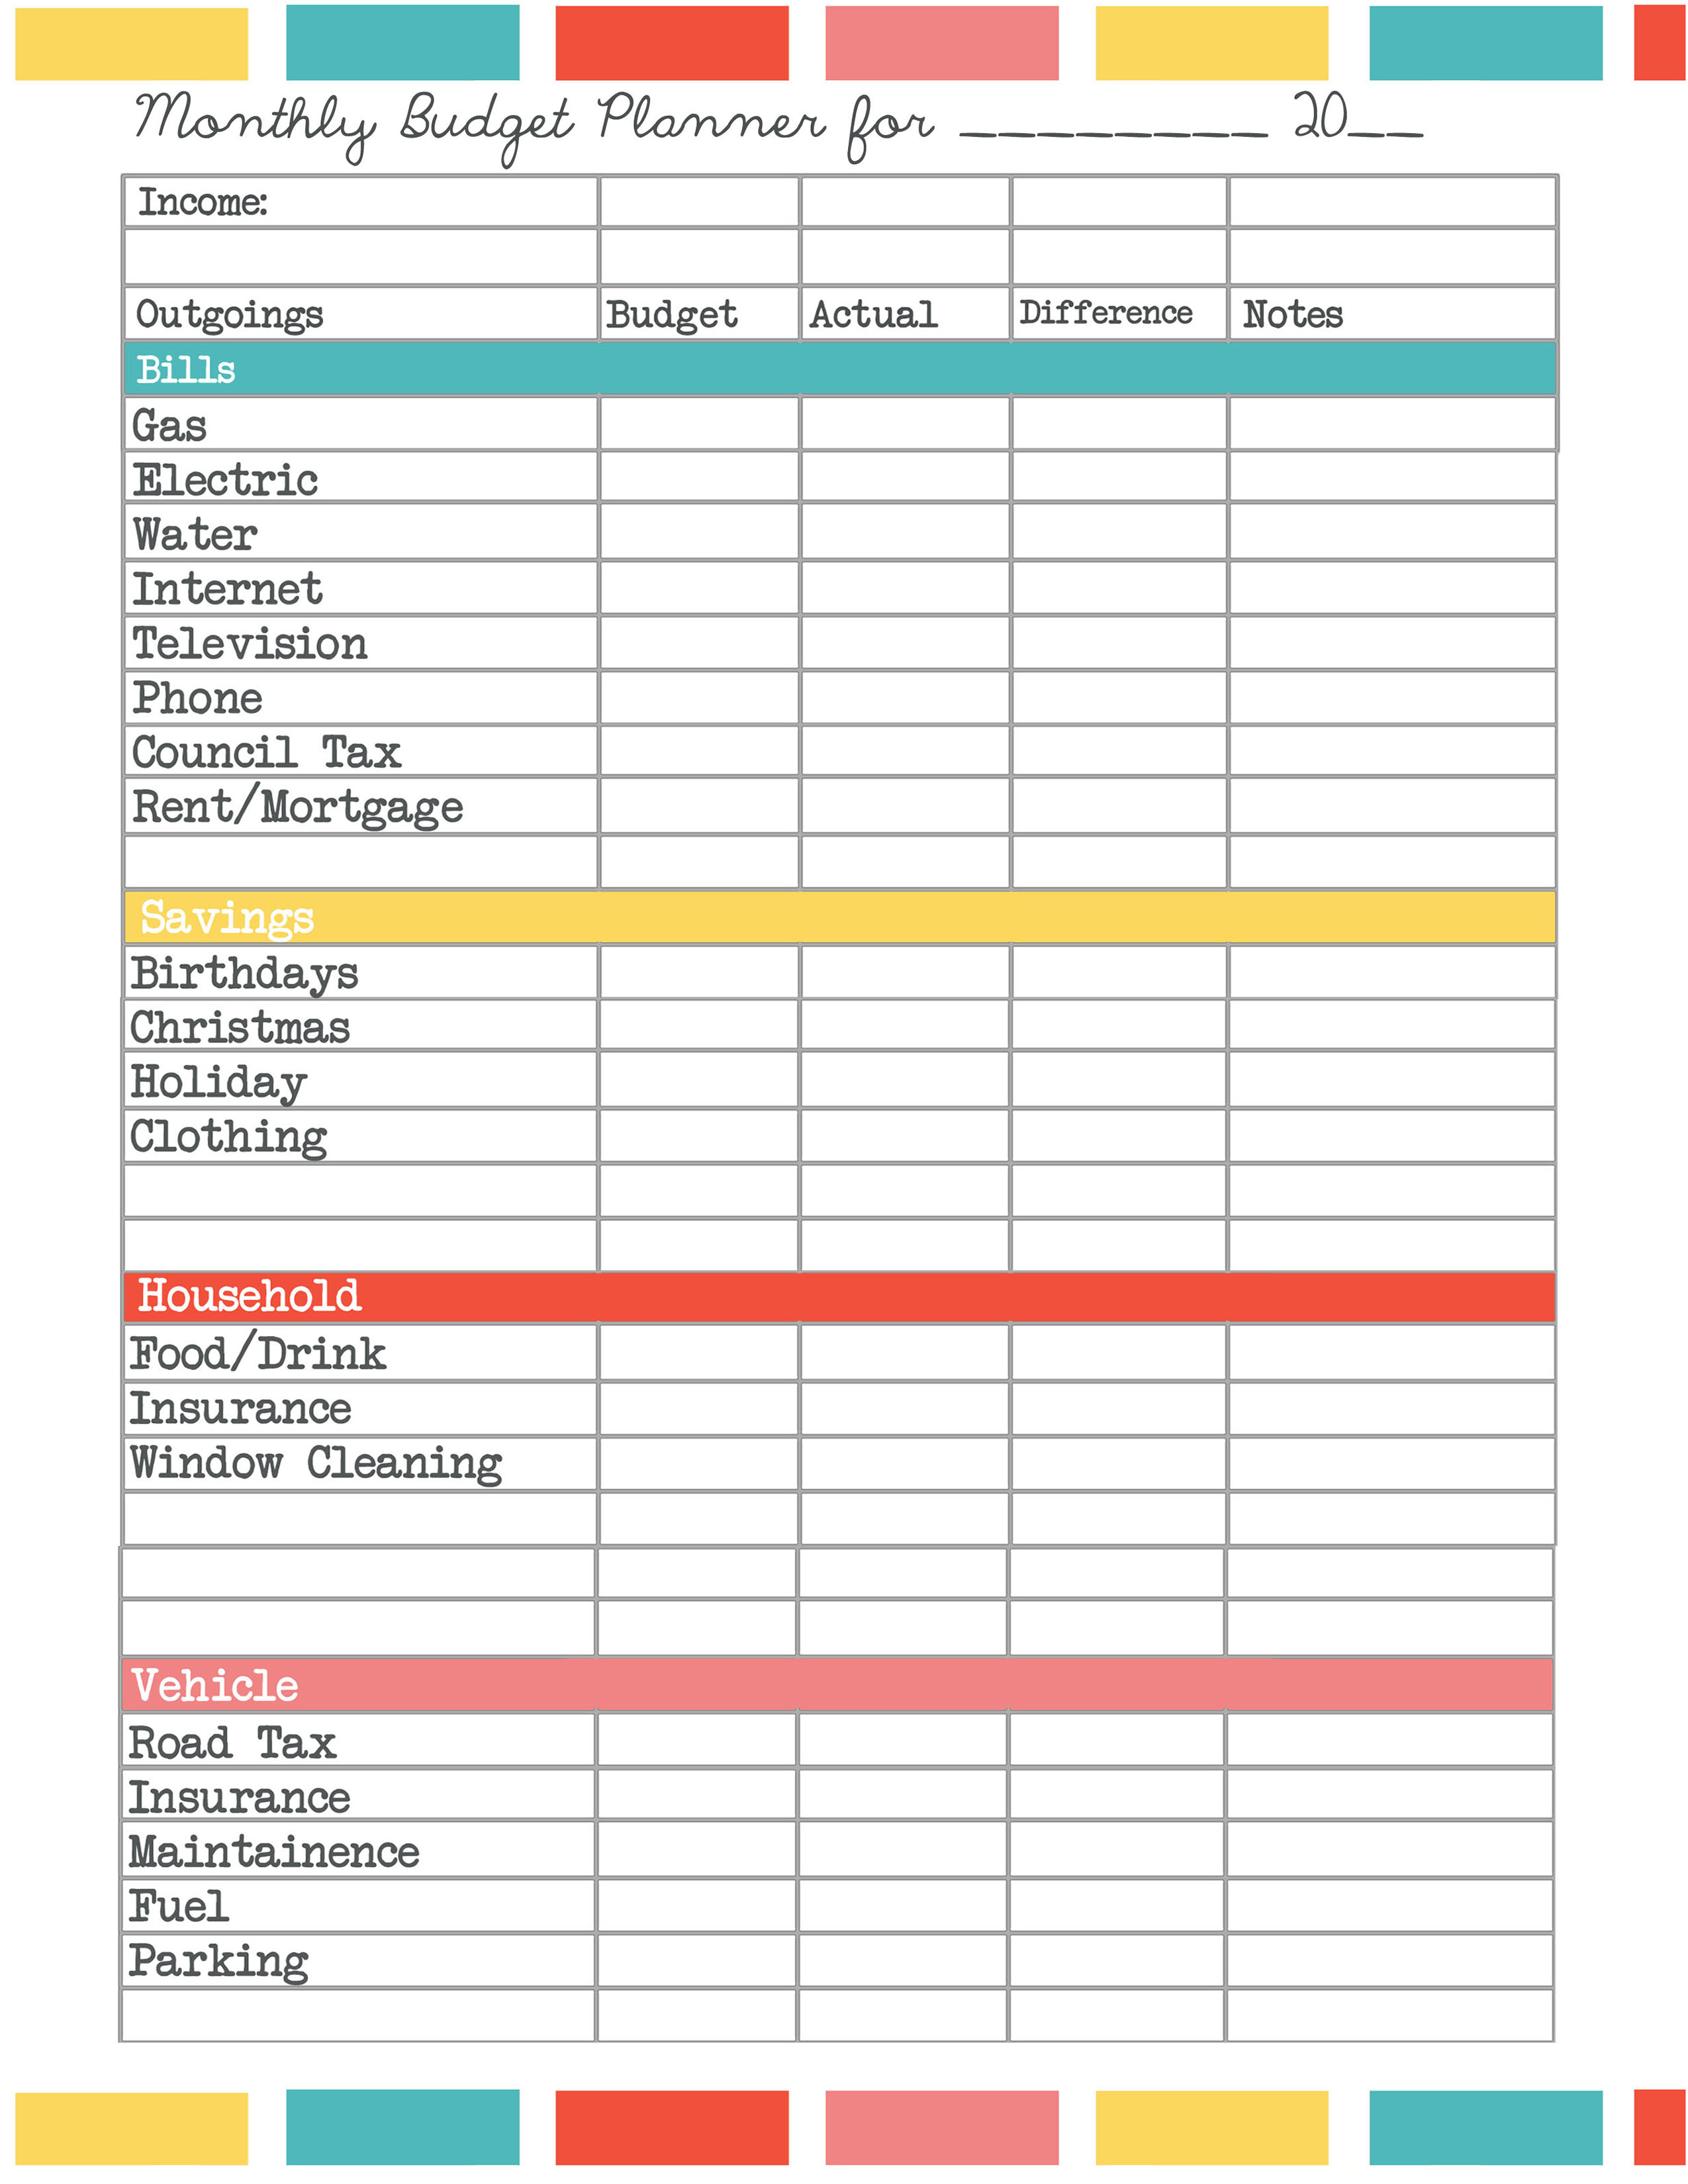 Easy Budget And Financial Planning Spreadsheet For Busy Families | Easy Budget Planner Free Printable Worksheets